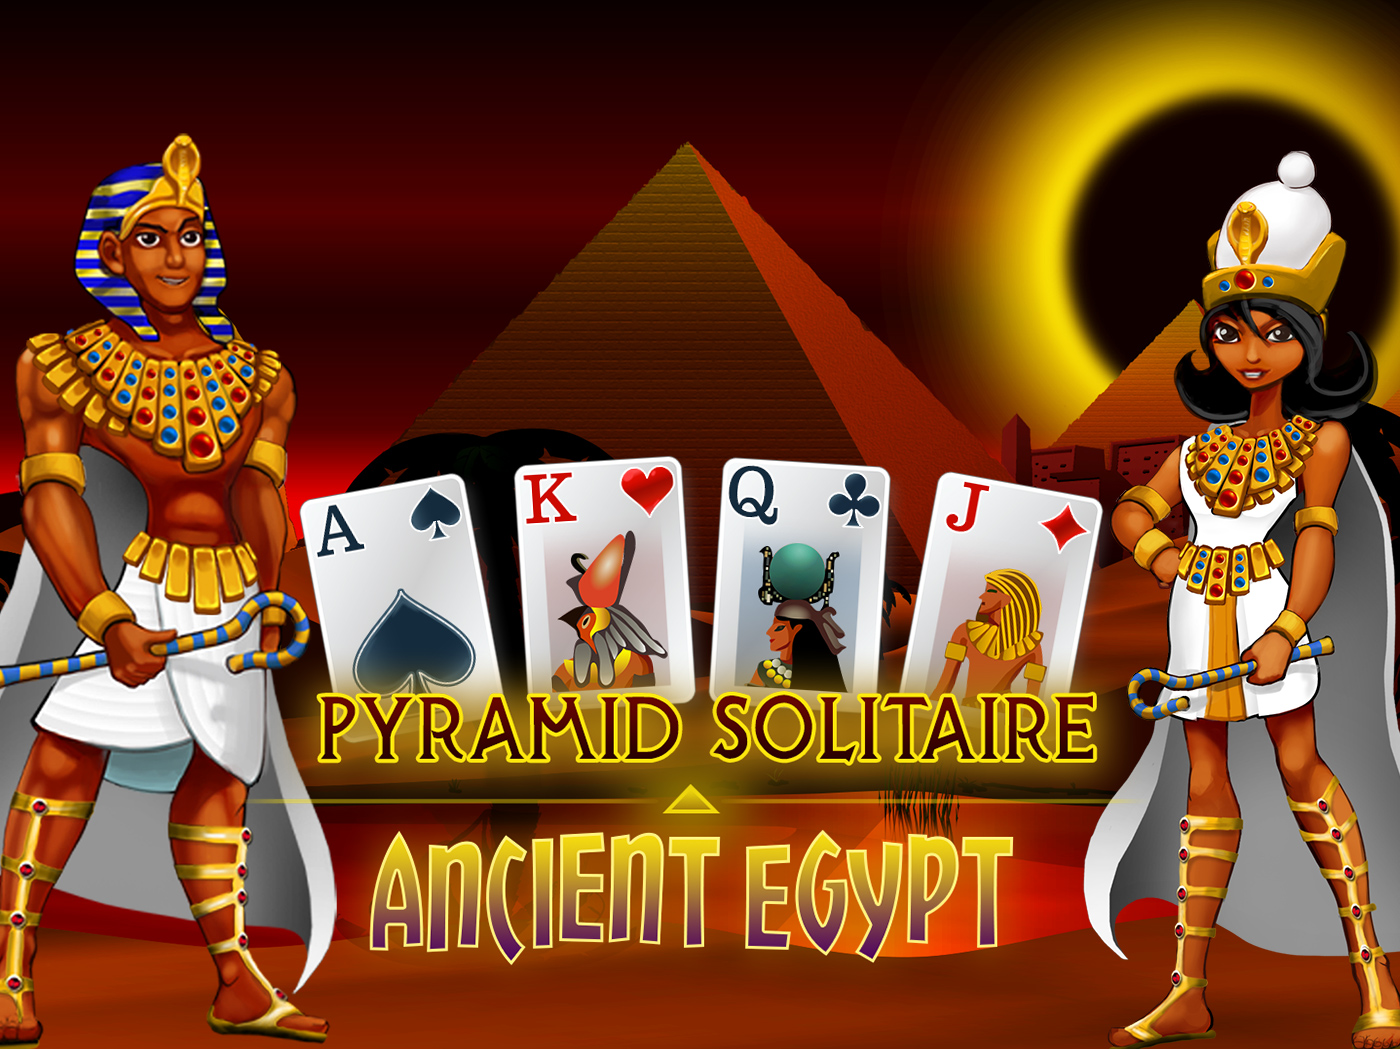 Pyramid solitaire ancient